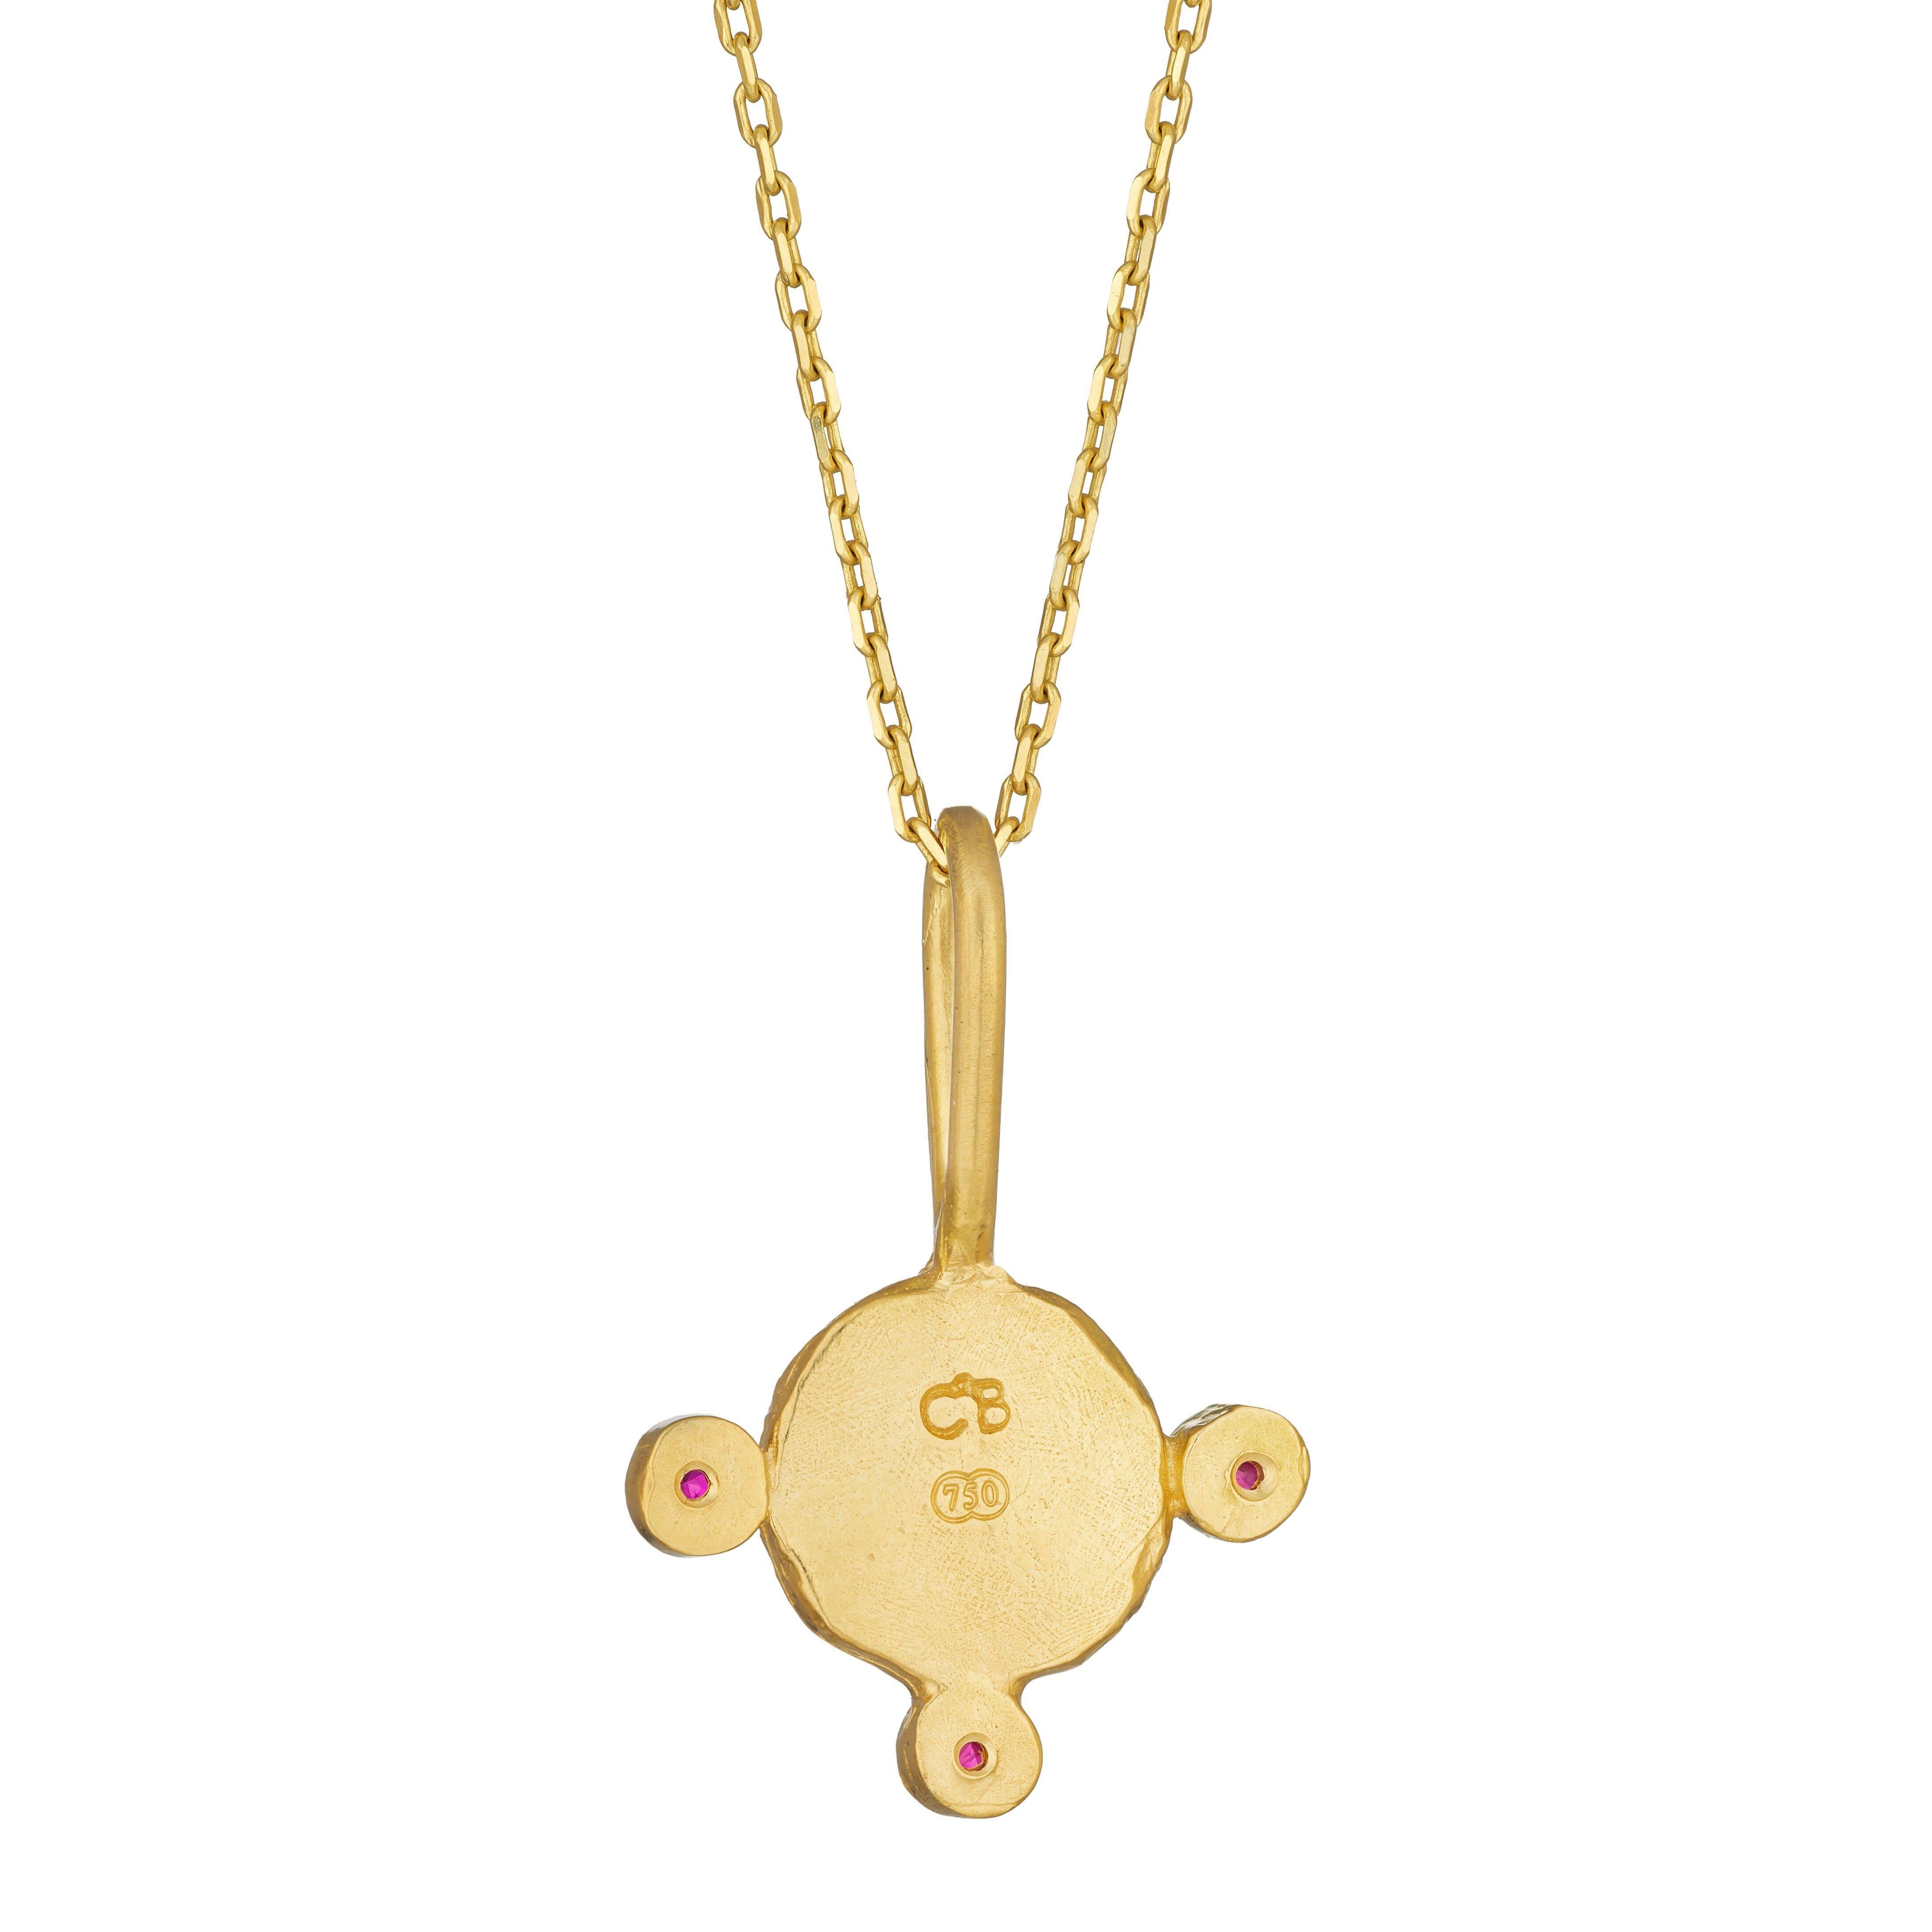 July Birthstone Pendant Necklace with Ruby, 18 Karat Yellow Gold
Handcrafted and individually cast in 18-karat solid yellow gold. Olivia carves each piece from wax, making these pendants unique, which we believe is what gives them their beauty.  
A